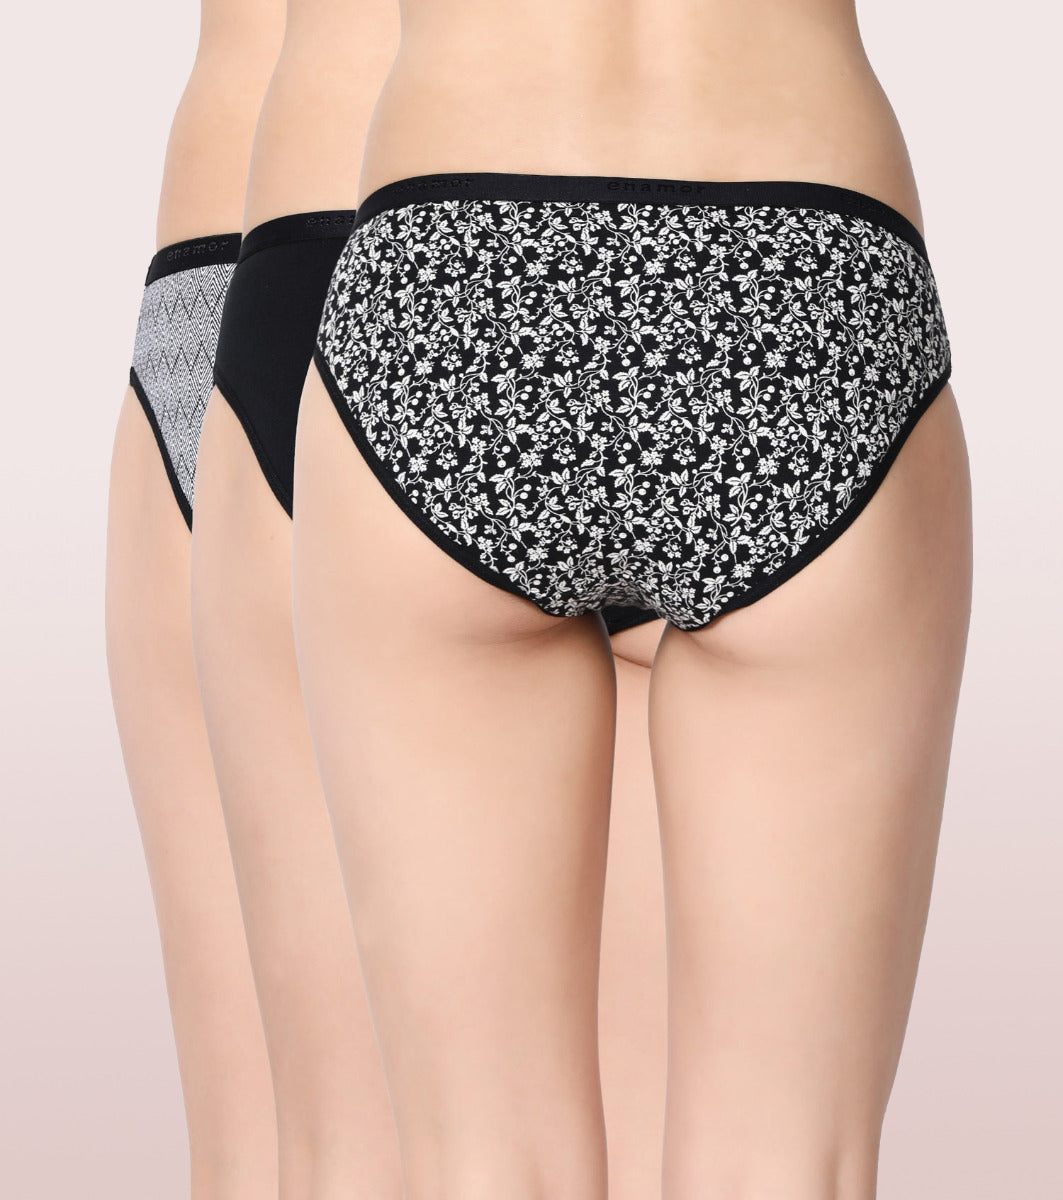 Low Waist Bikini Cotton Panty - Pack Of 3- Colors And Print May